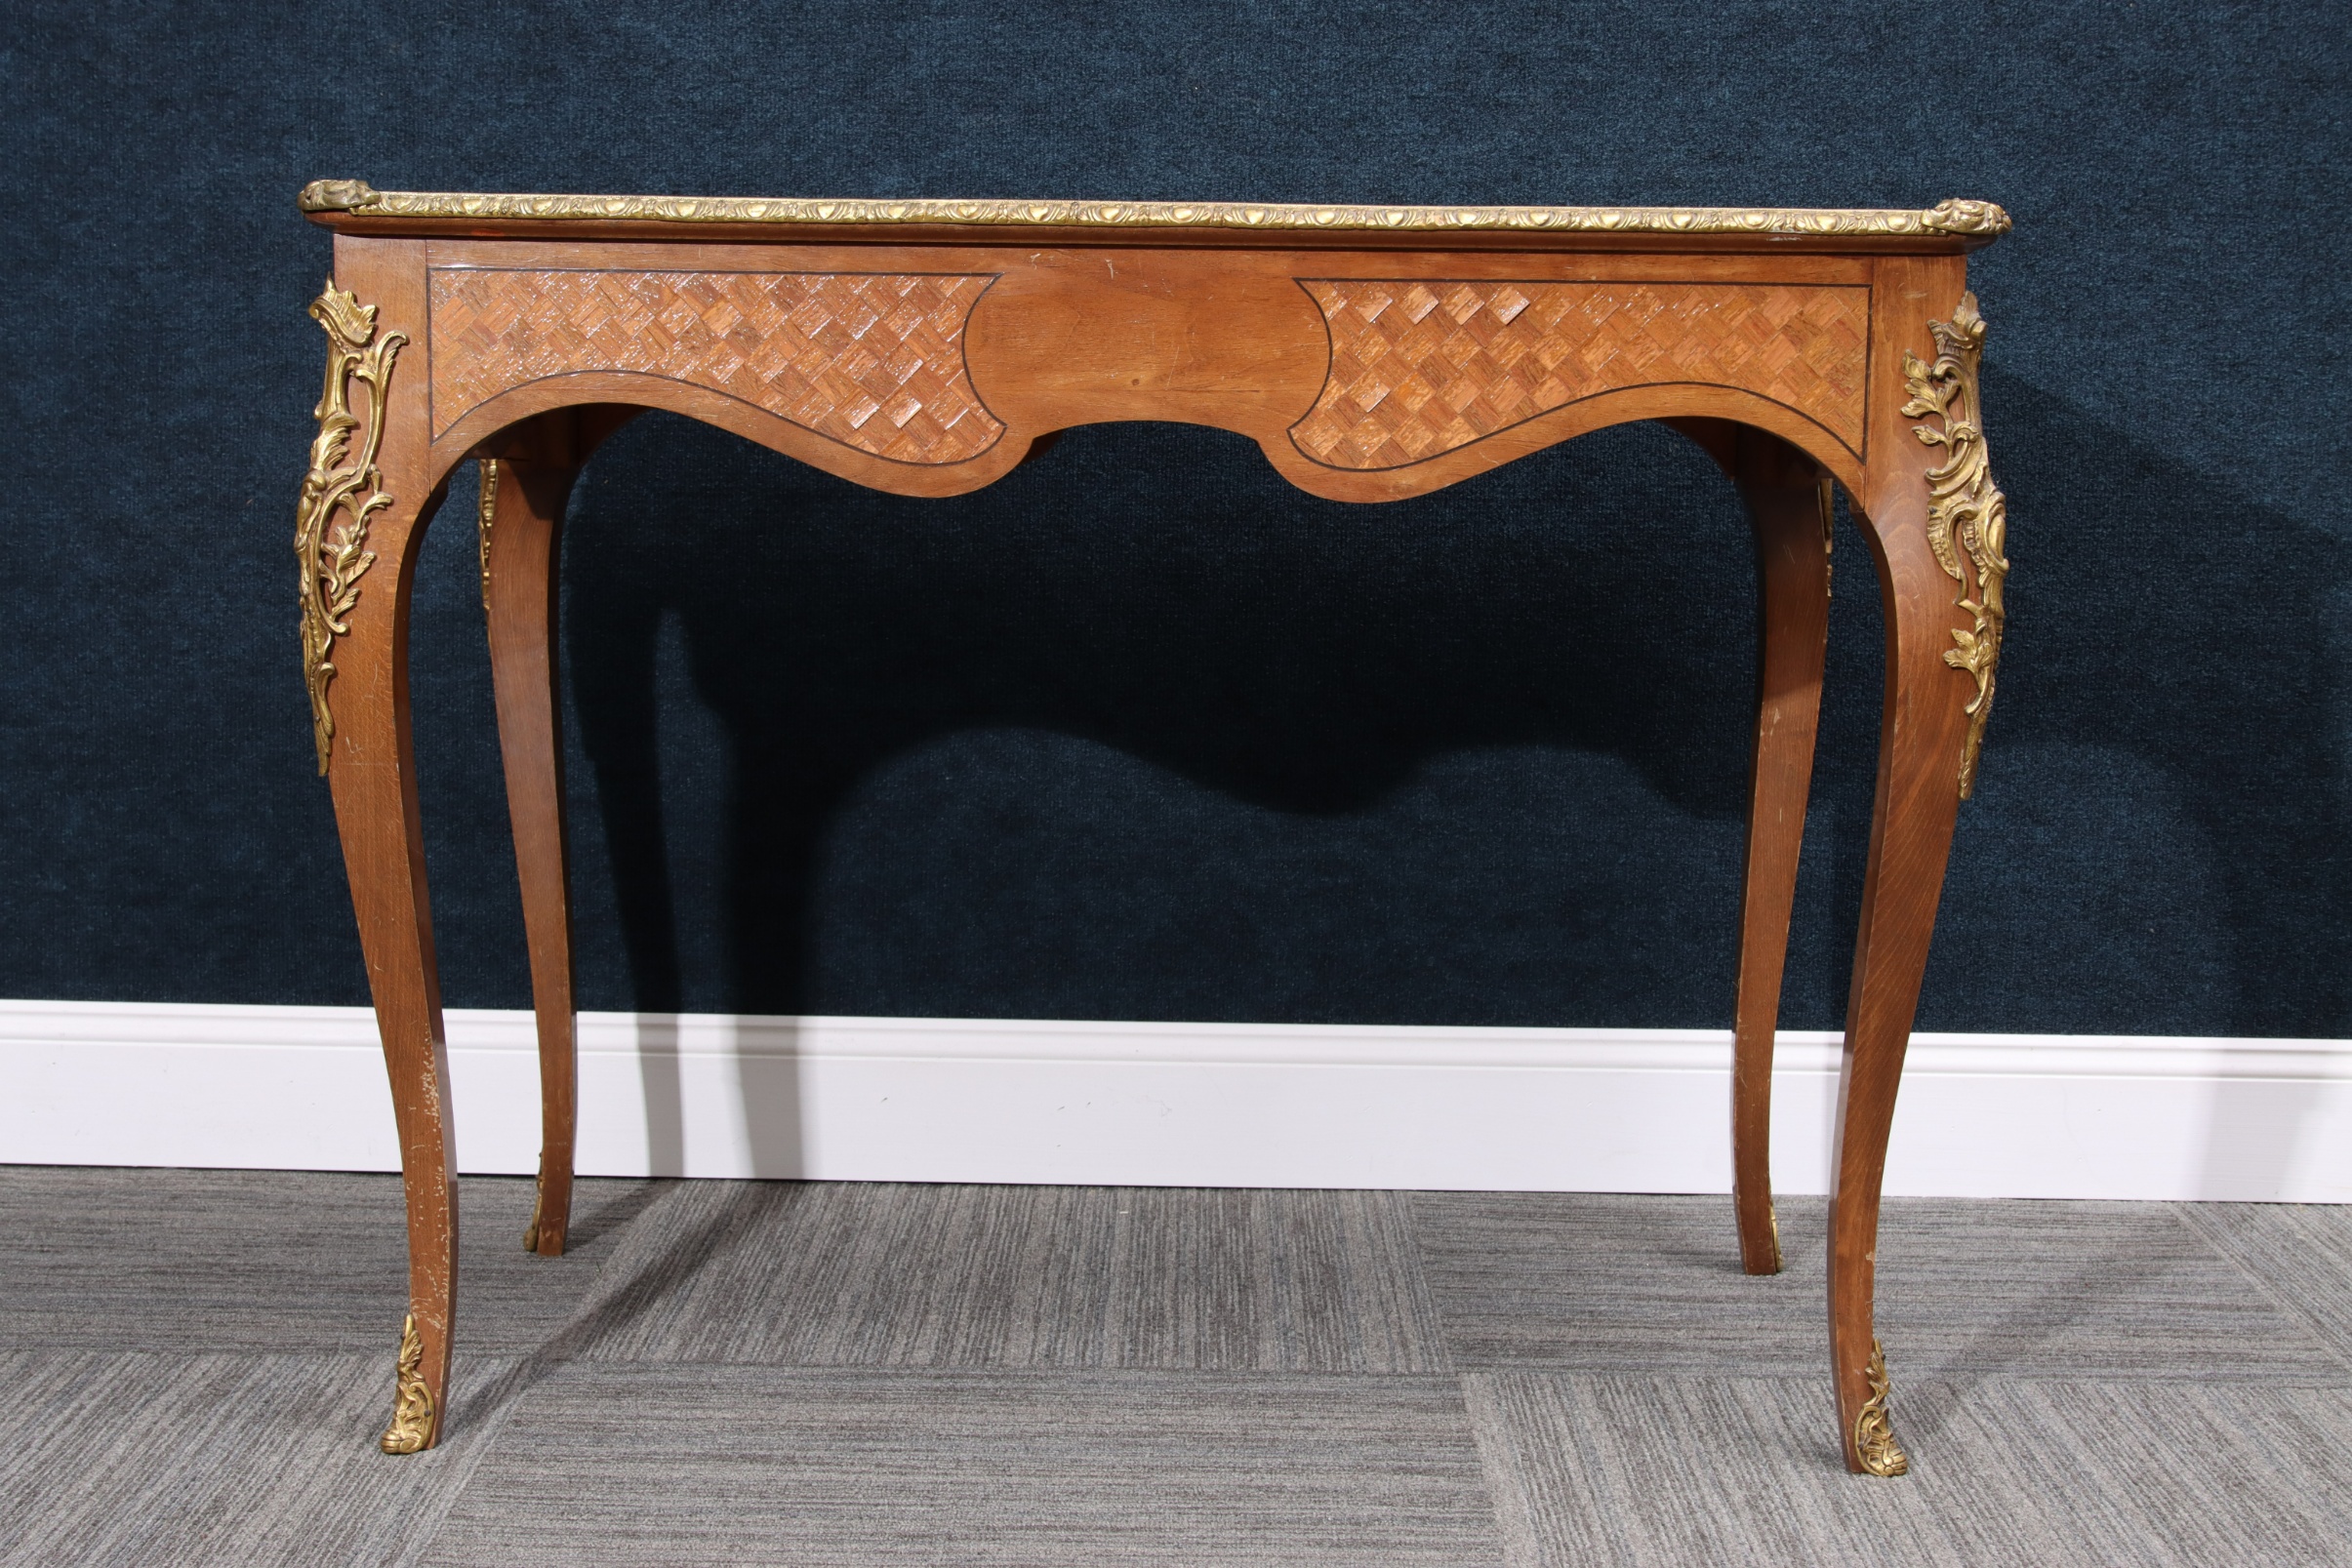 Antique French Louis XV Style Desk - Image 8 of 8